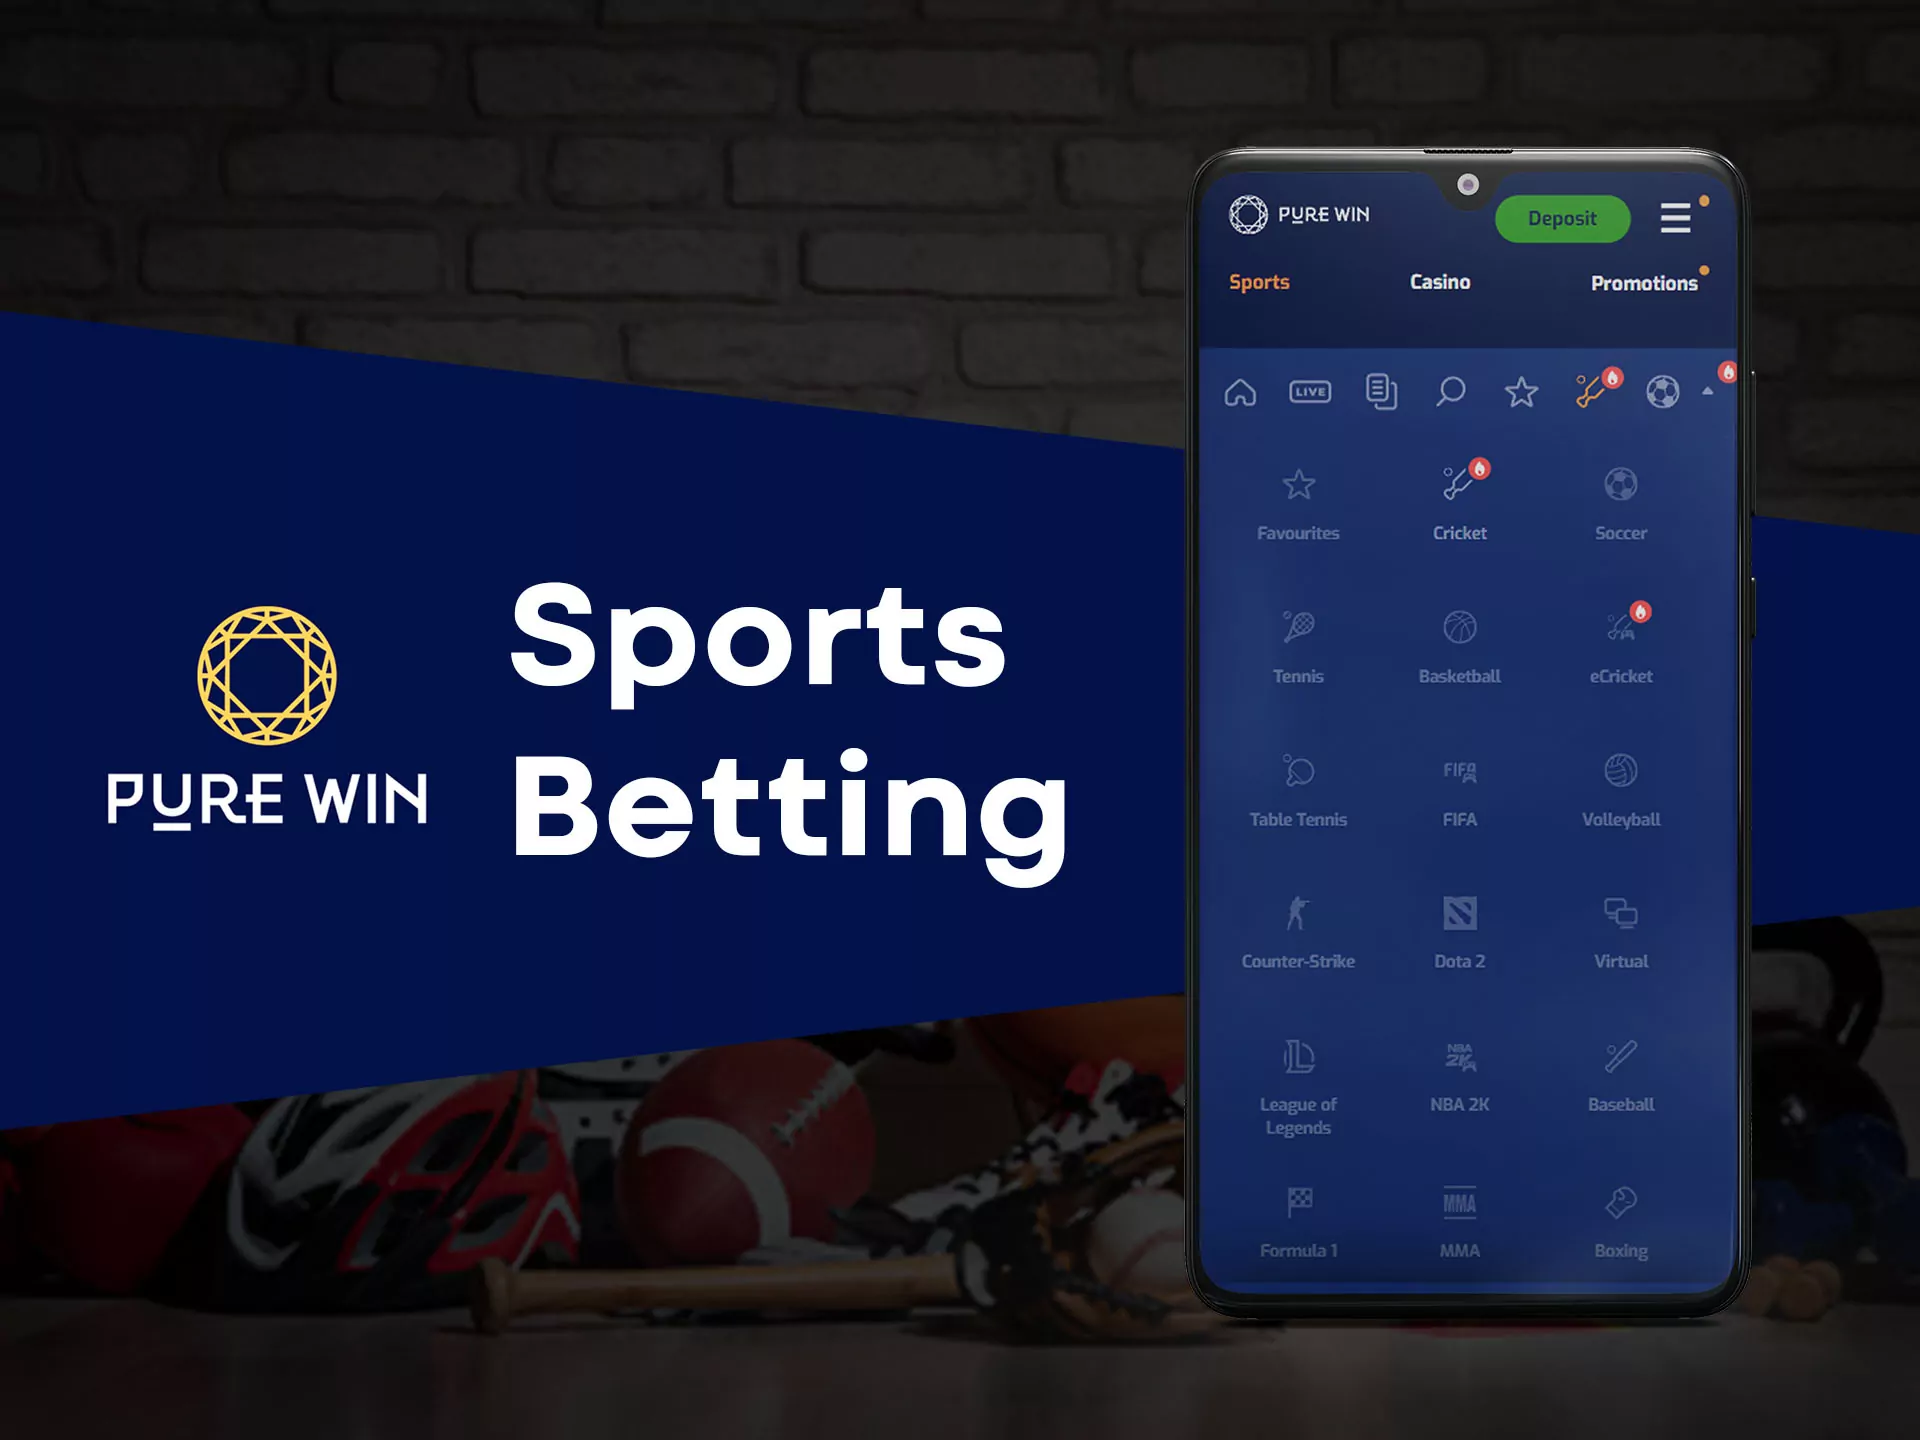 Pure Win have a lot of sports to bet on.